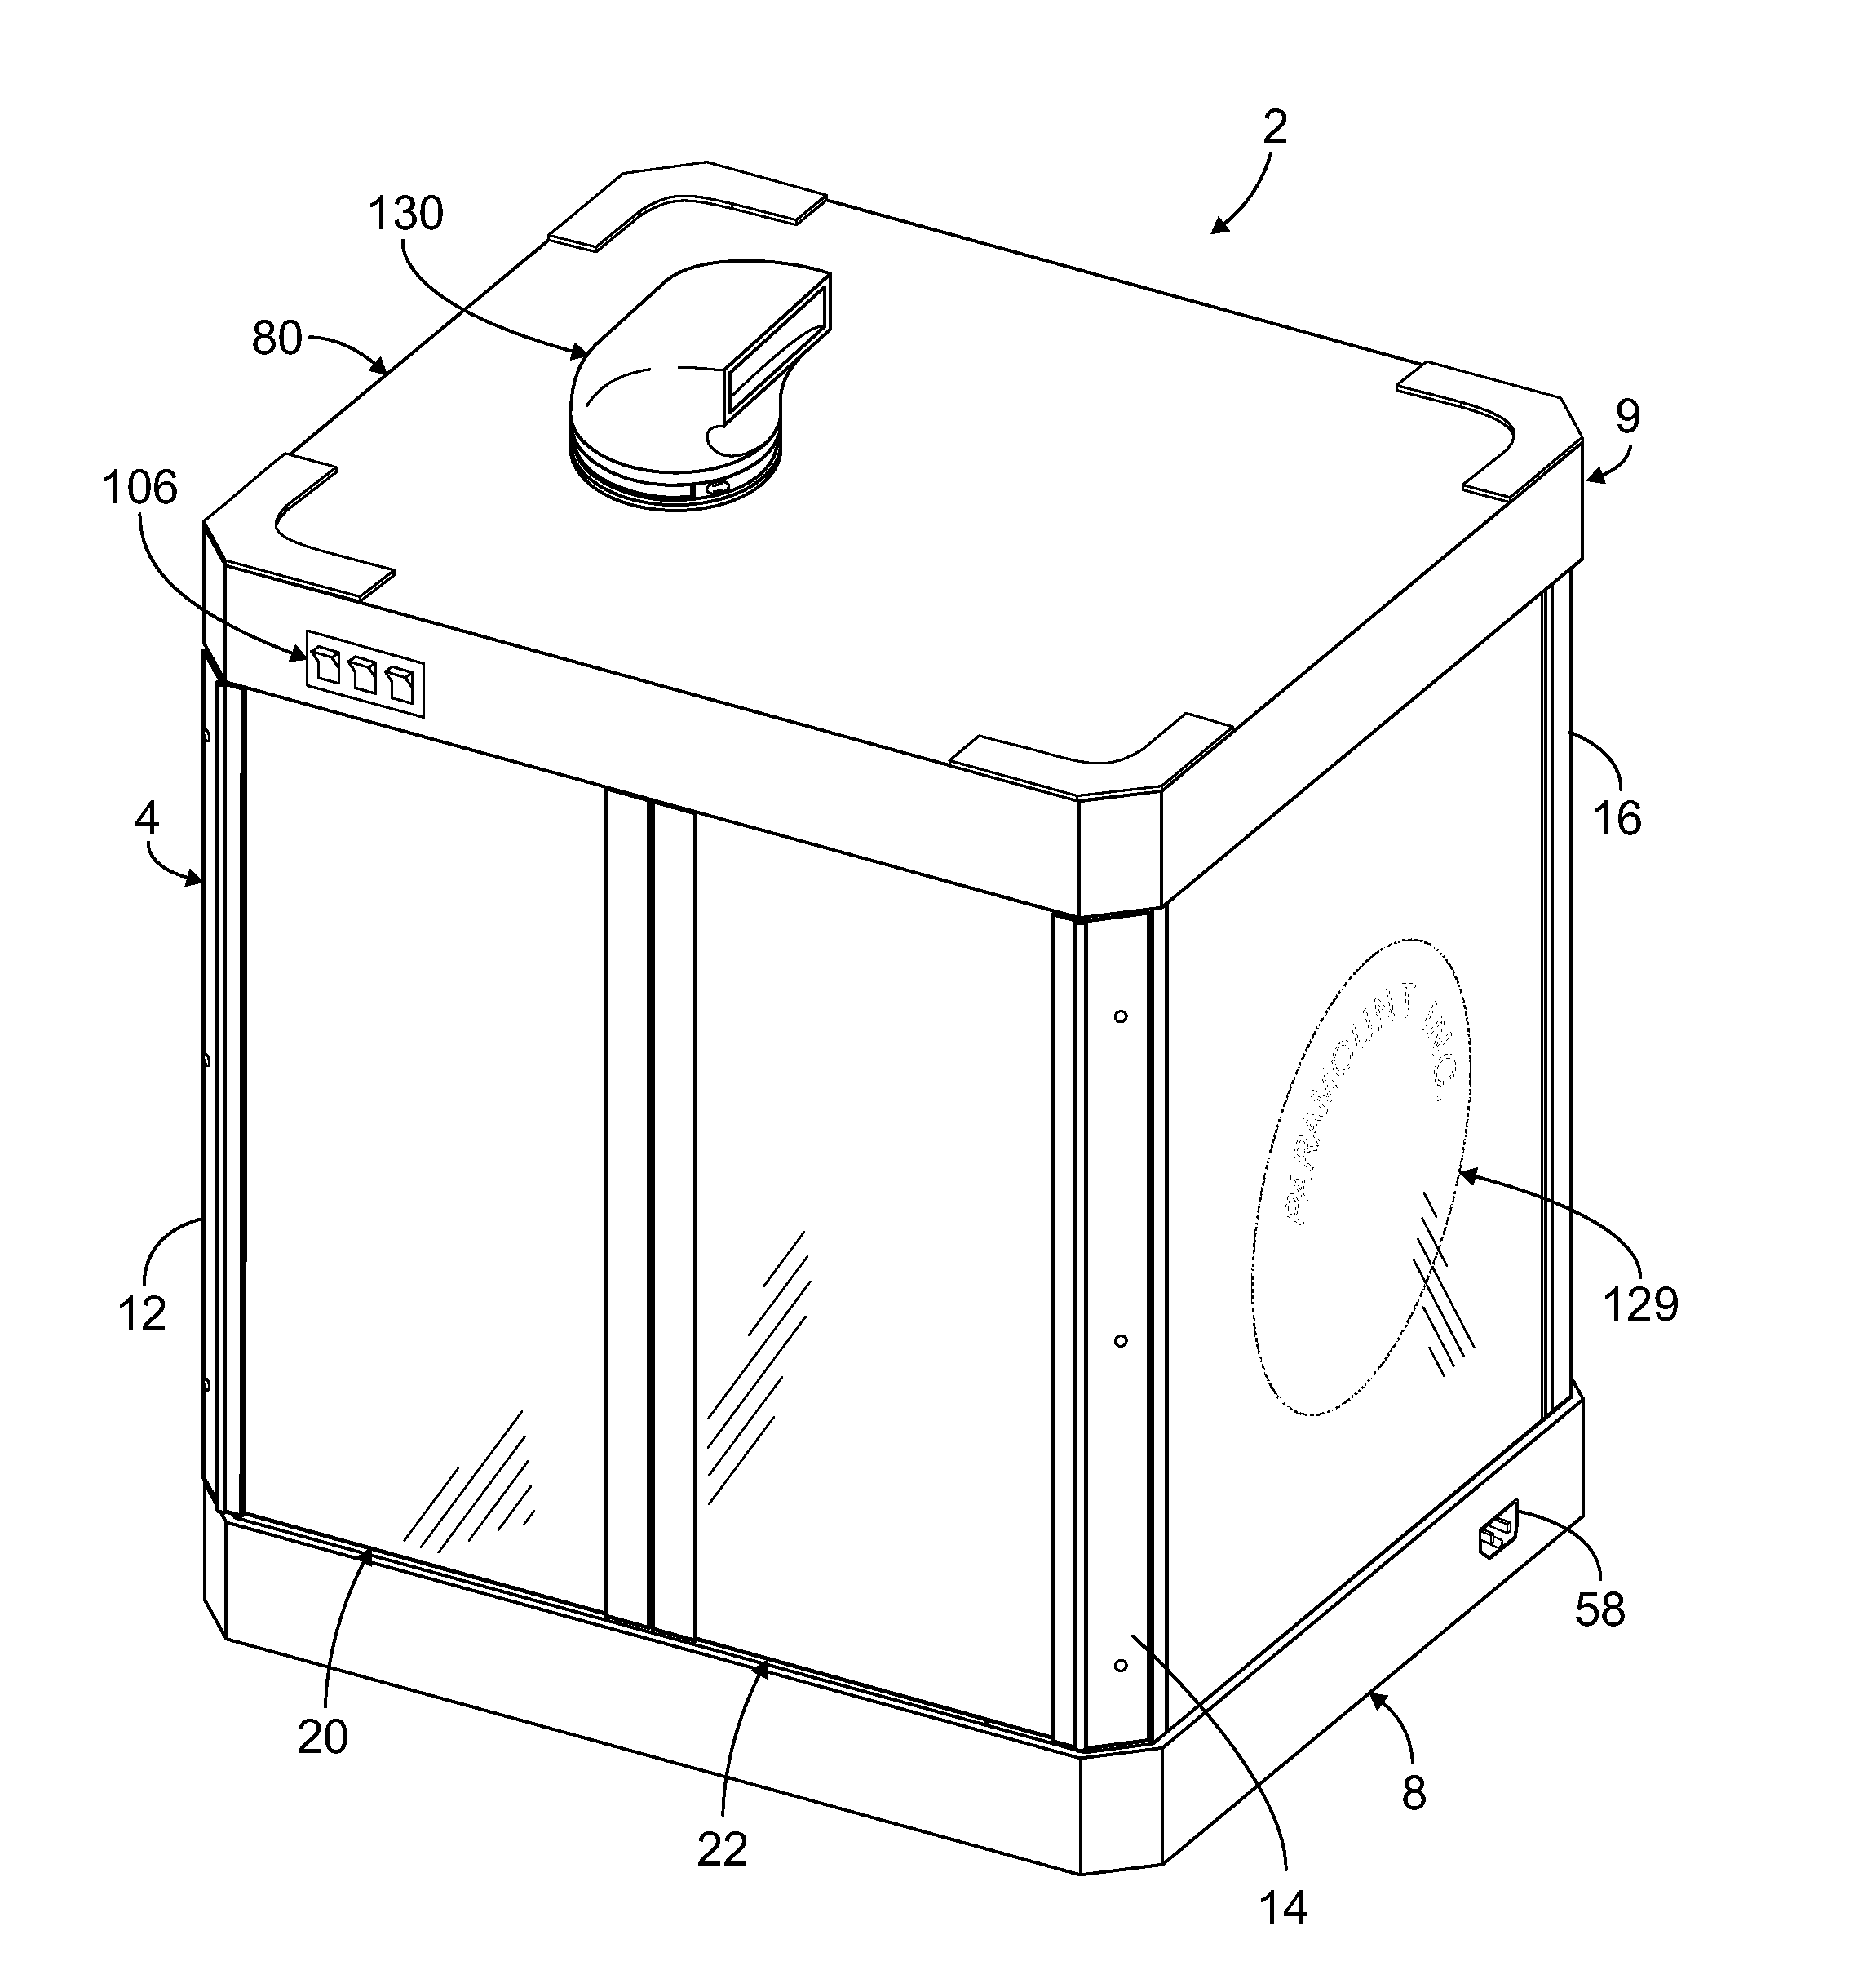 Popcorn machines and methods of making and using the same